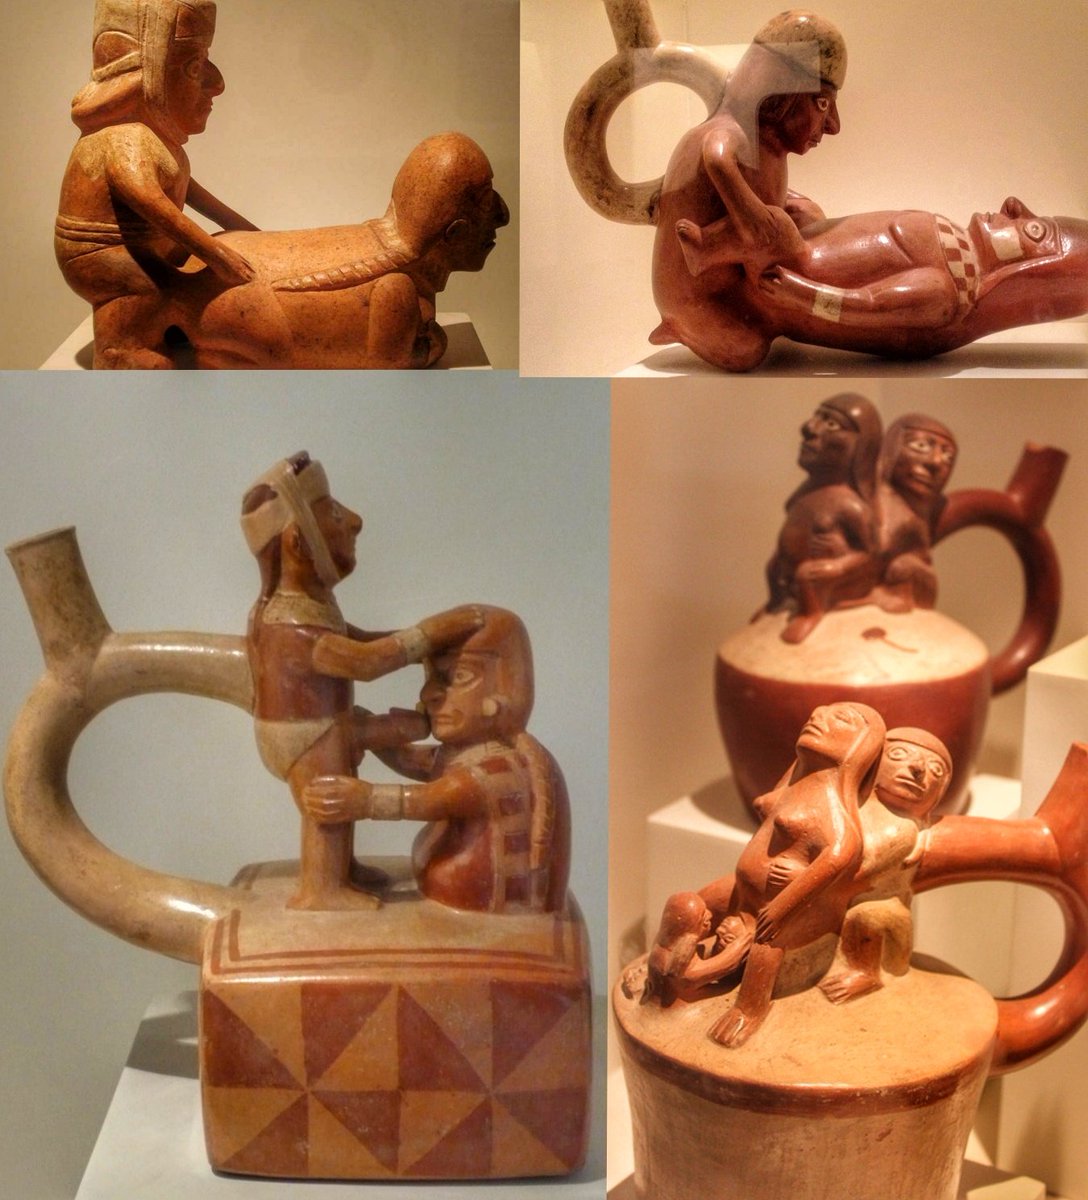 RT @ArysPan: Erotic pottery from the ancient Andean Moche civilization.
Museo Larco in Lima, Peru https://t.co/TS4r4B0LSE